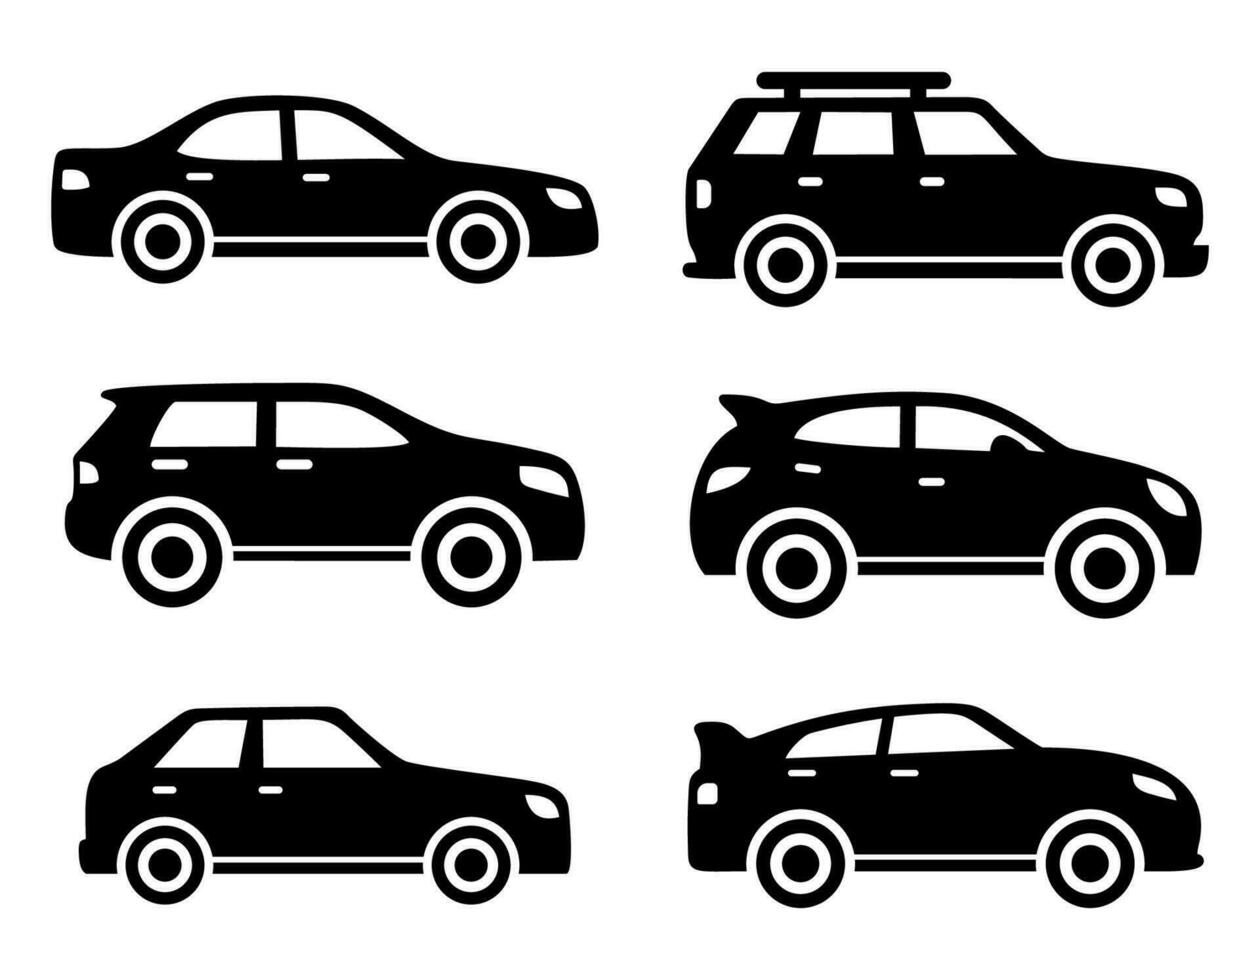 Different car black icon set side view. Vehicle collection. Car silhouettes. Transportation symbol. Vector illustration